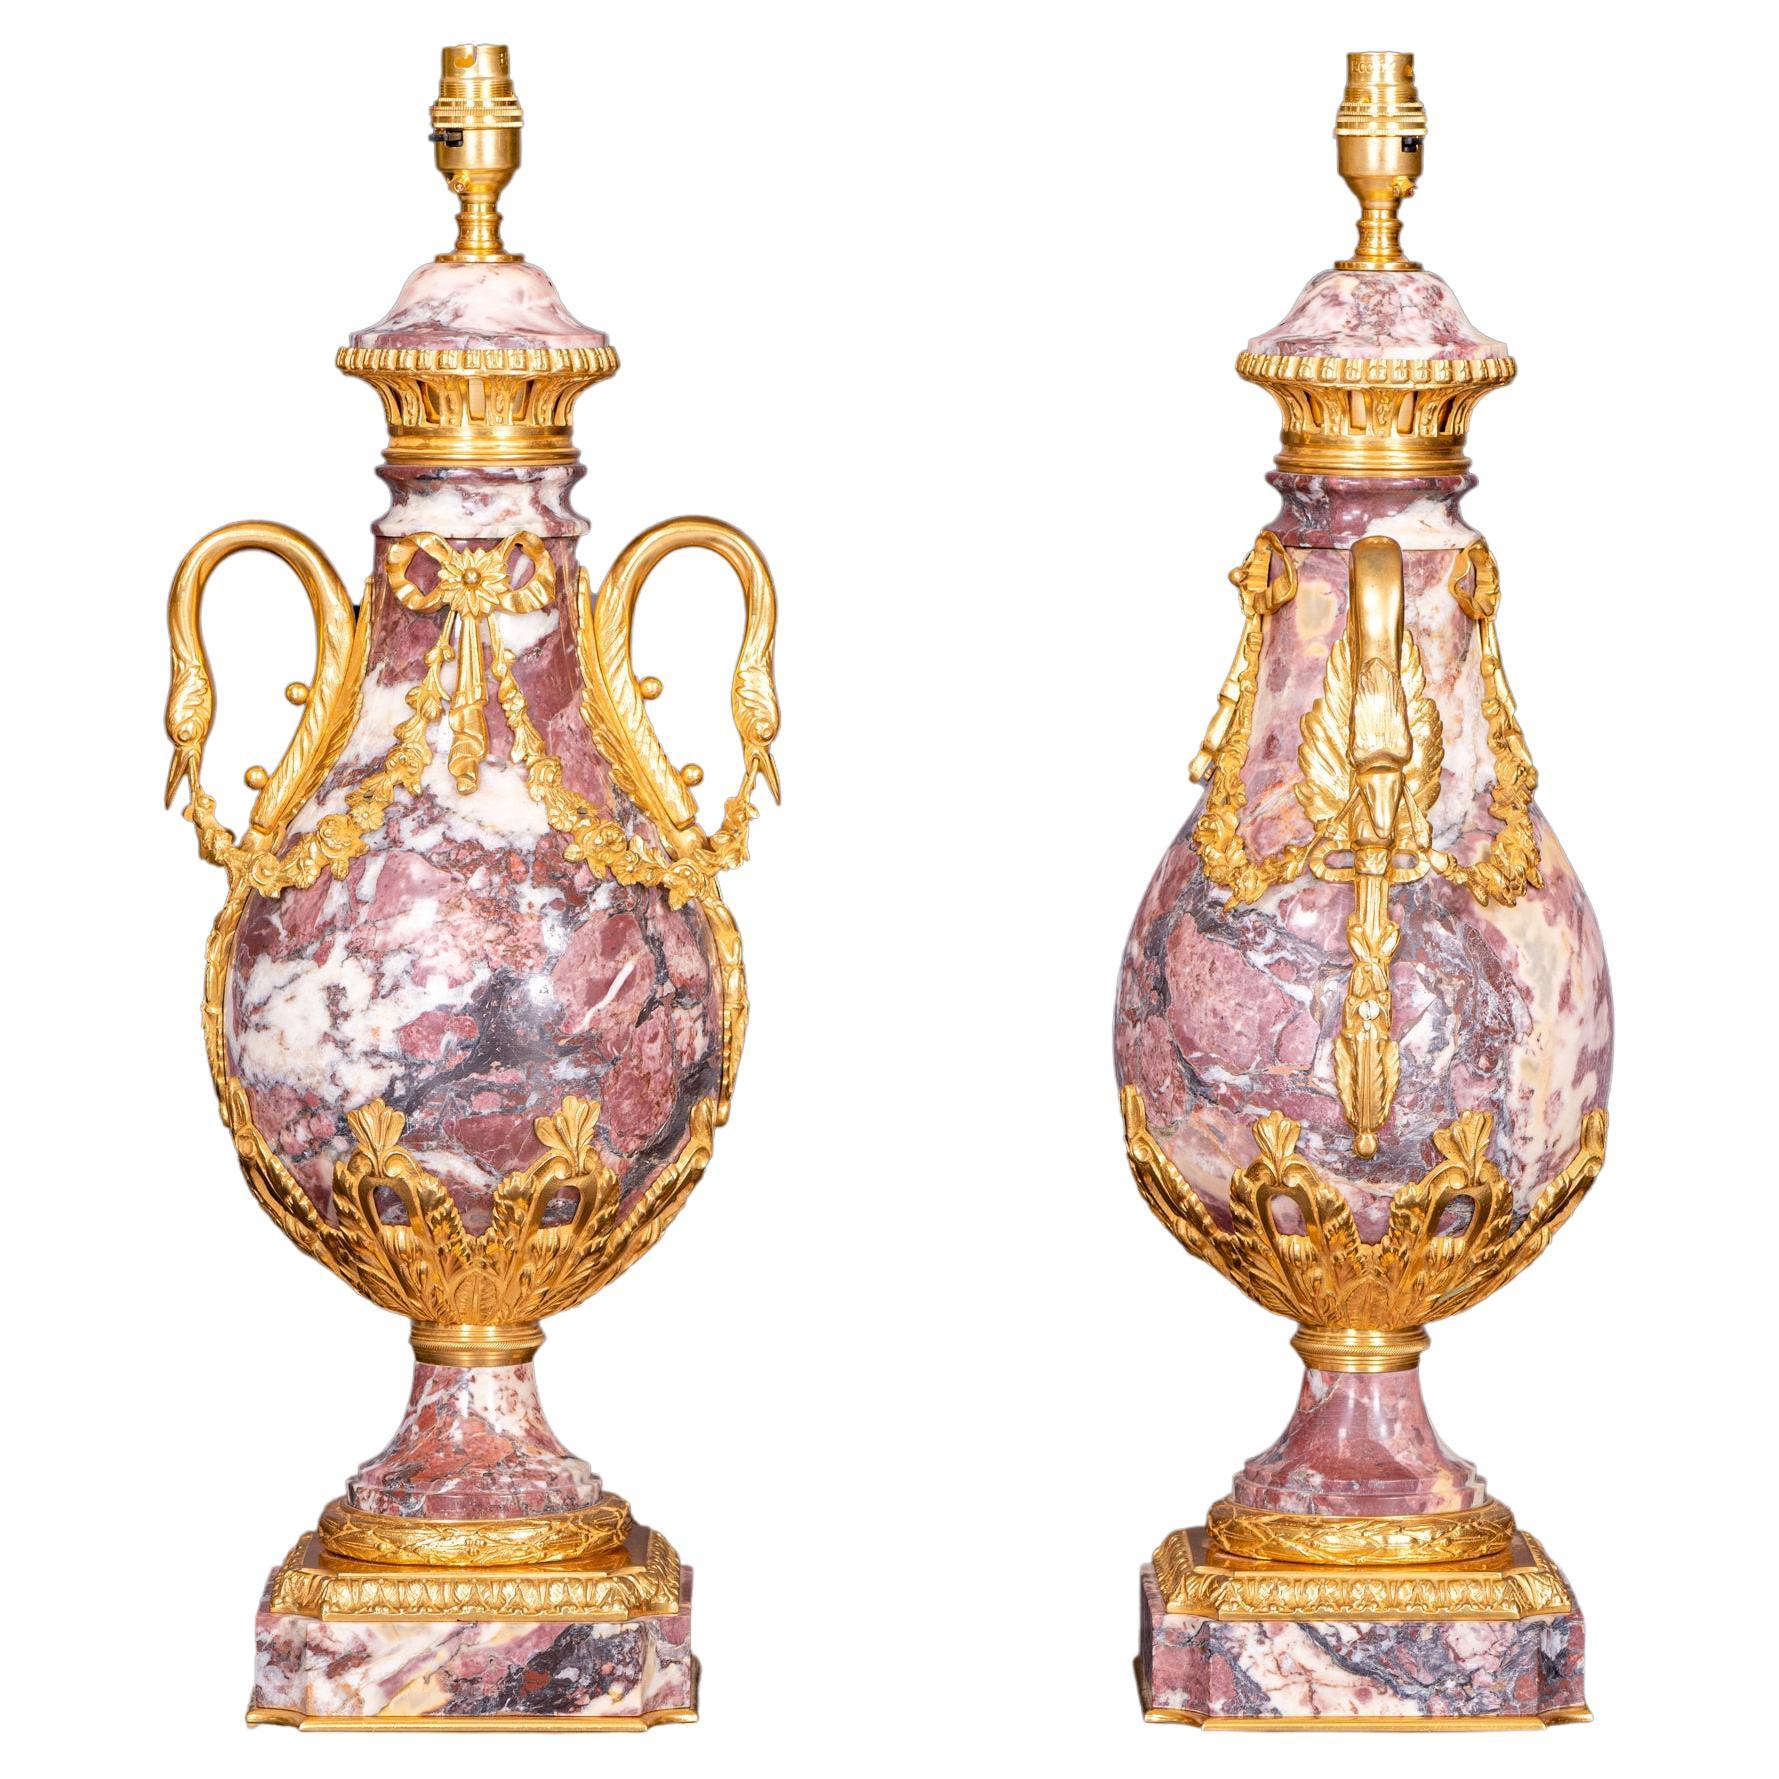 A stunning pair of French 19th century Louis XVI style ormolu and Brèche Violette marble lamps. Each lamp is raised by an elegant square base with concave corners and a finely mottled wrap around Coeur de Rai band below the wrap around berried